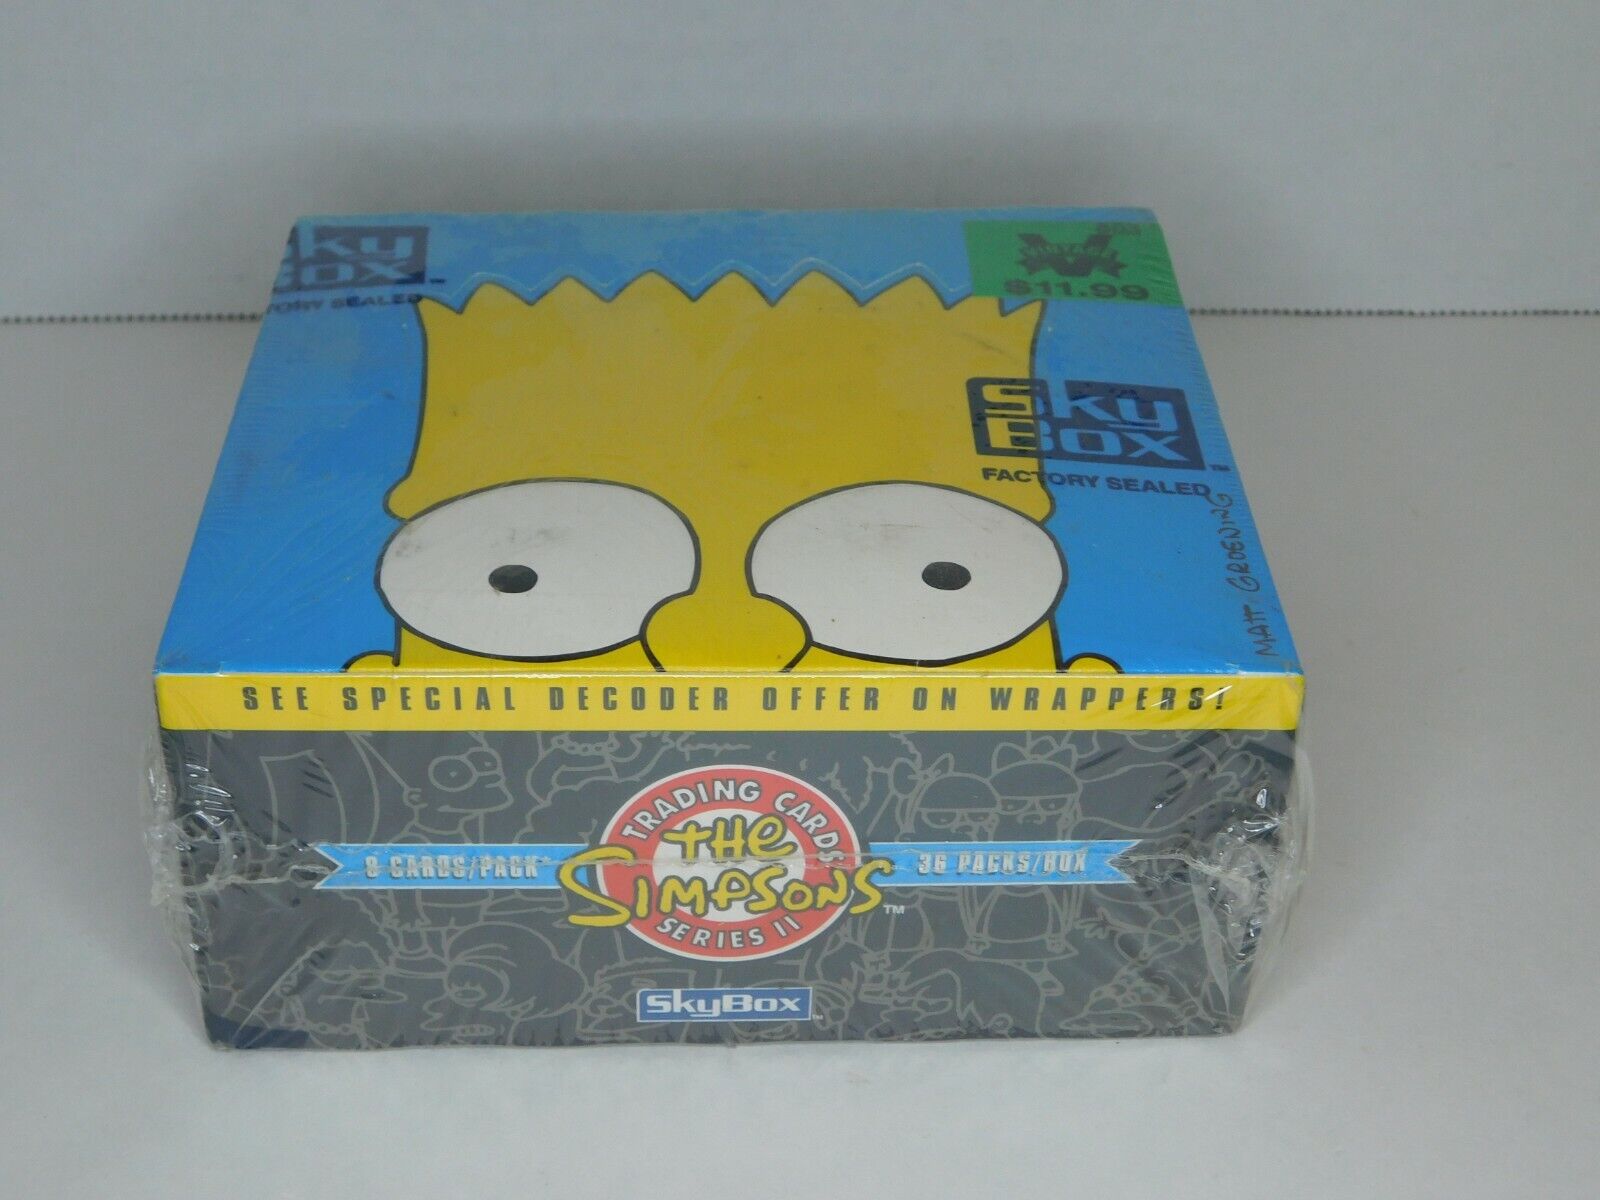 1994 Skybox The Simpsons Series 2 Trading Cards Factory Sealed Box RARE